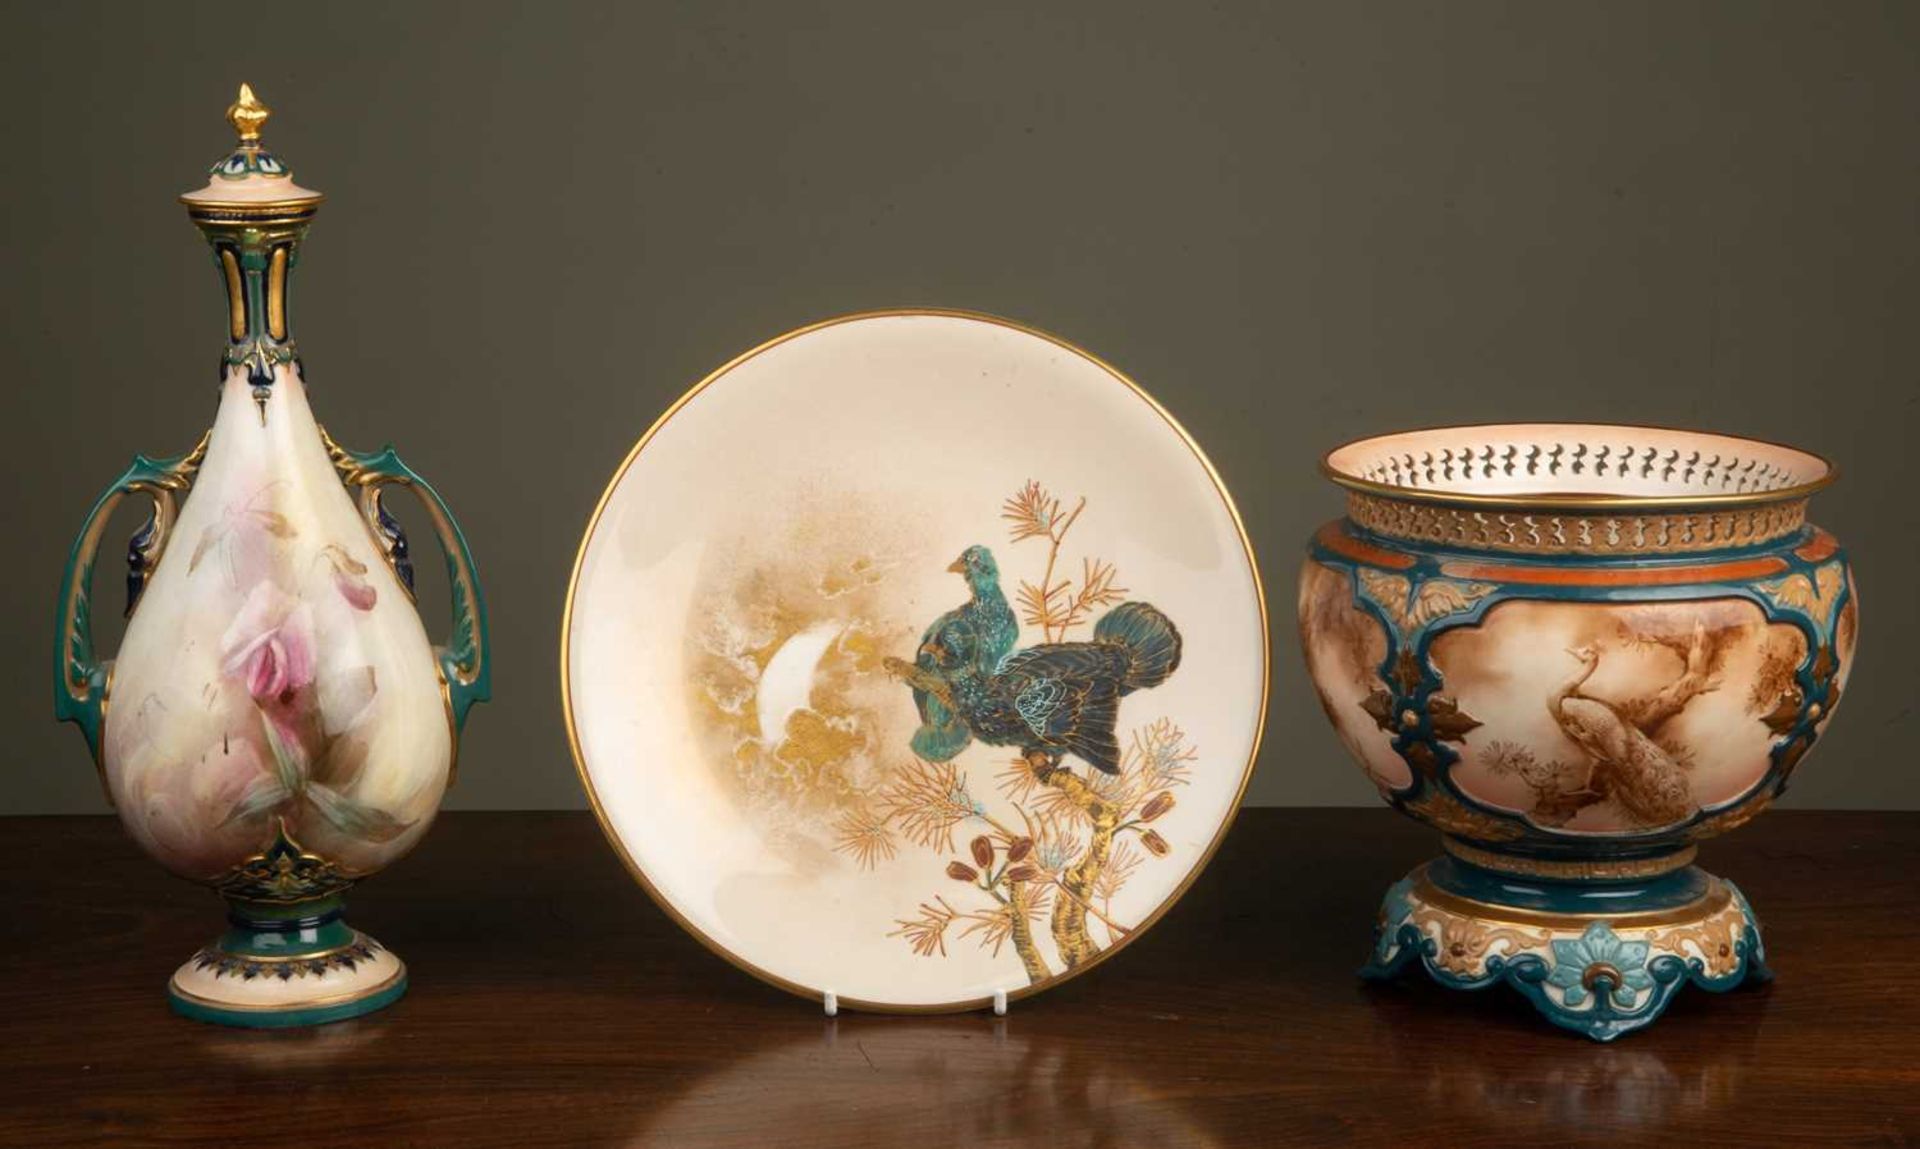 A Hadley's Worcester porcelain jardiniere with pierced rim and painted decoration of peacocks in - Image 2 of 5